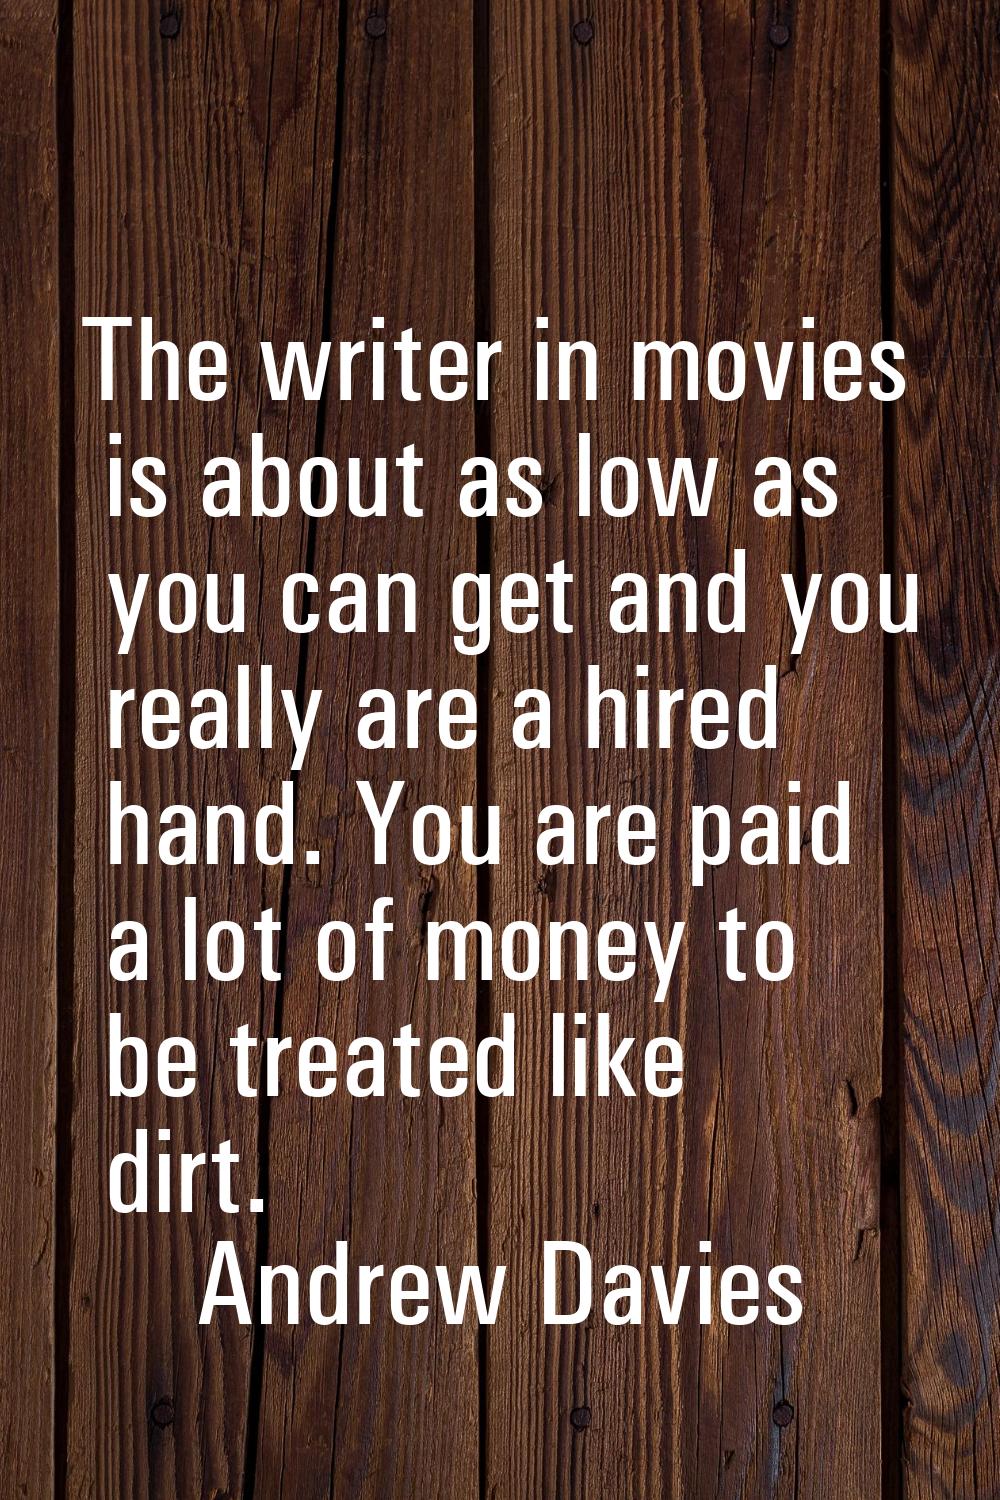 The writer in movies is about as low as you can get and you really are a hired hand. You are paid a